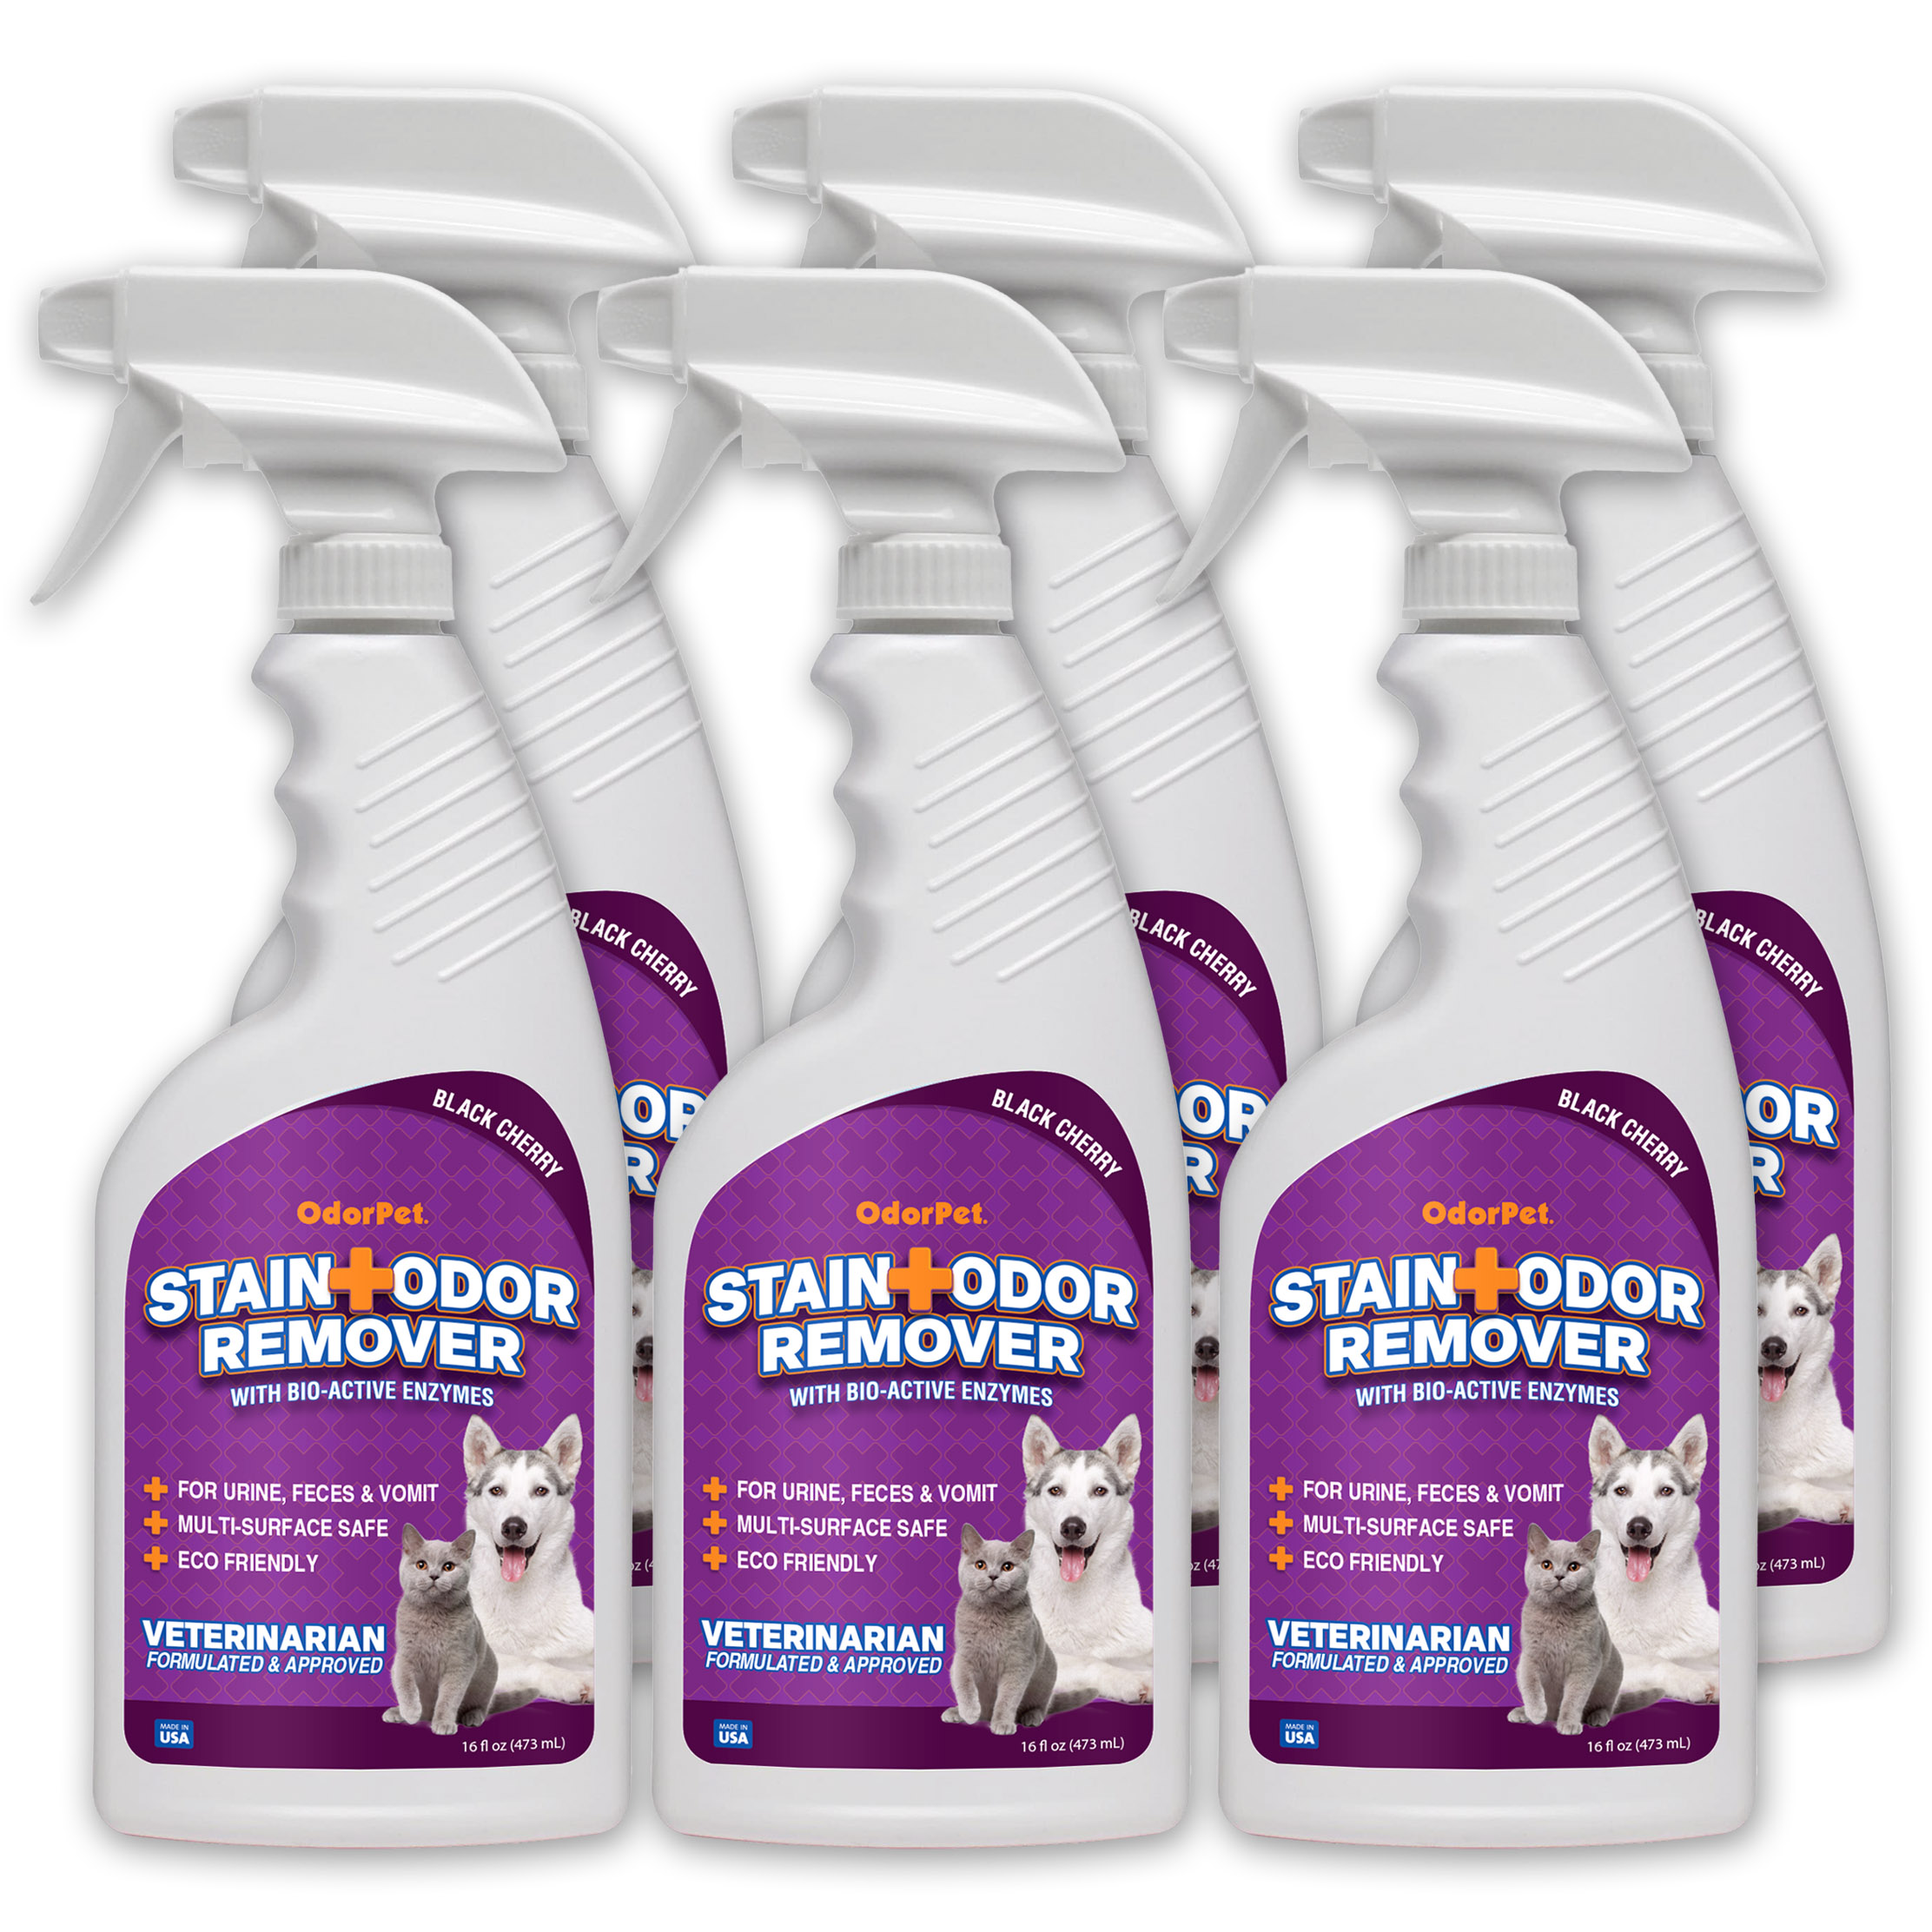 OdorPet stain and odor remover black cherry